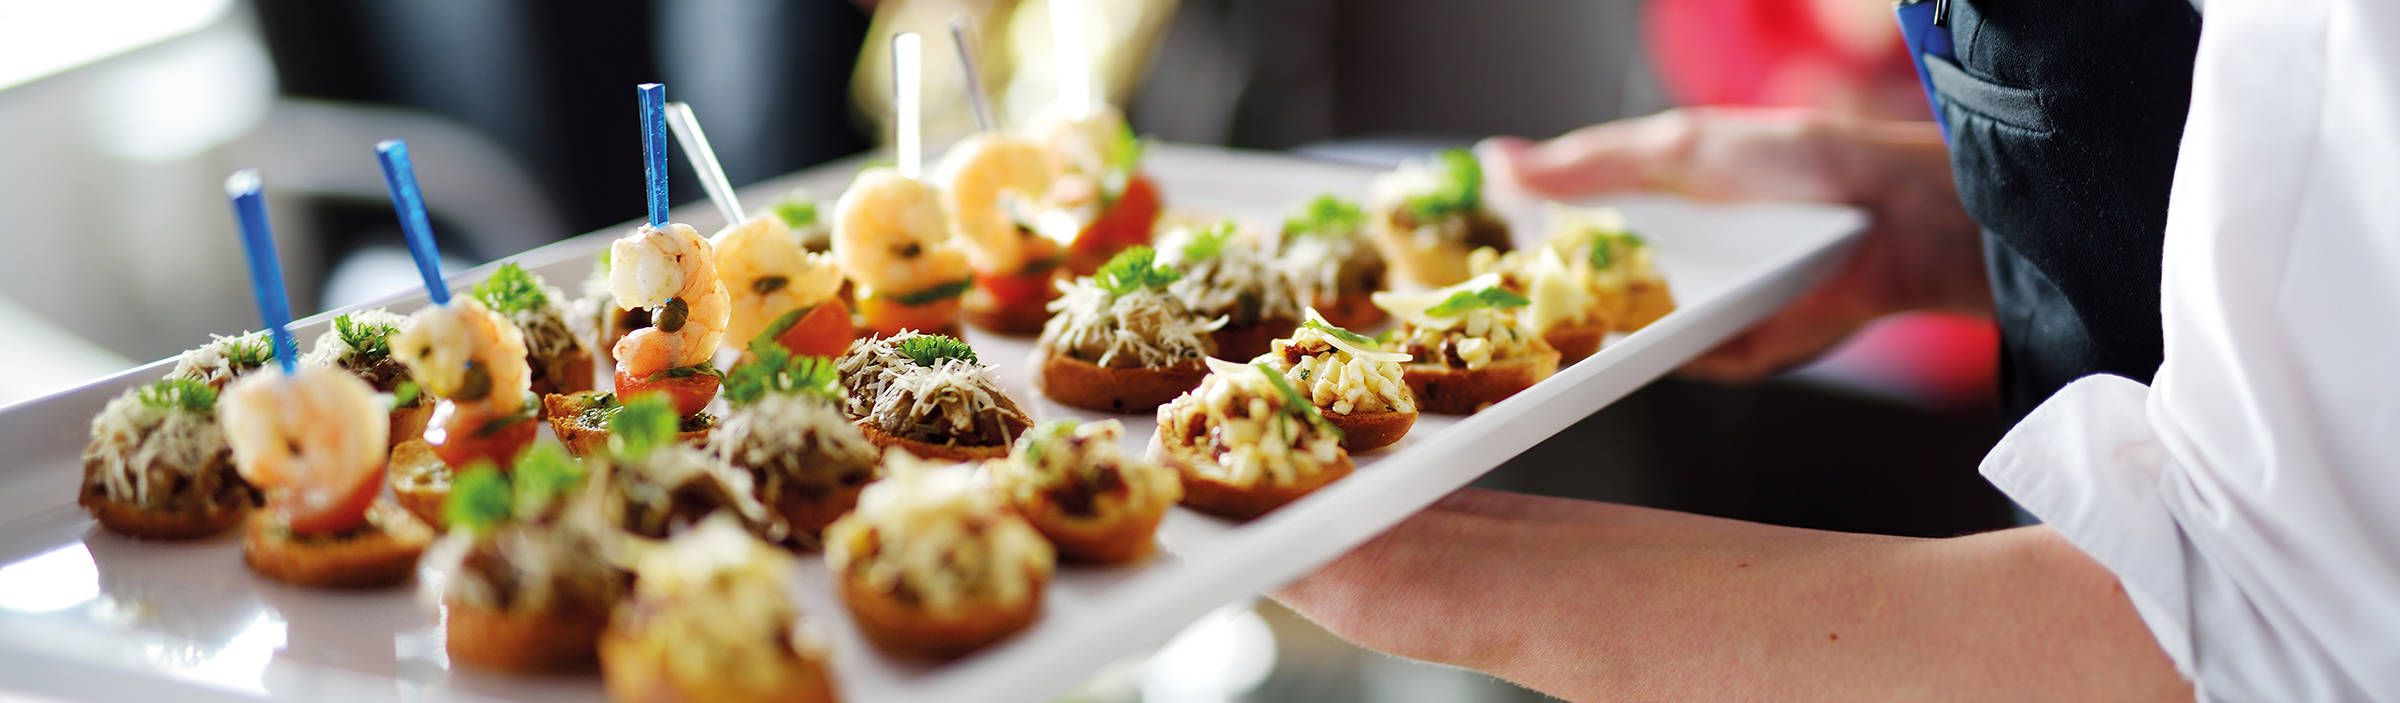 Catering-Special - Tagungen mit H-Hotels.com - Offizielle Webseite